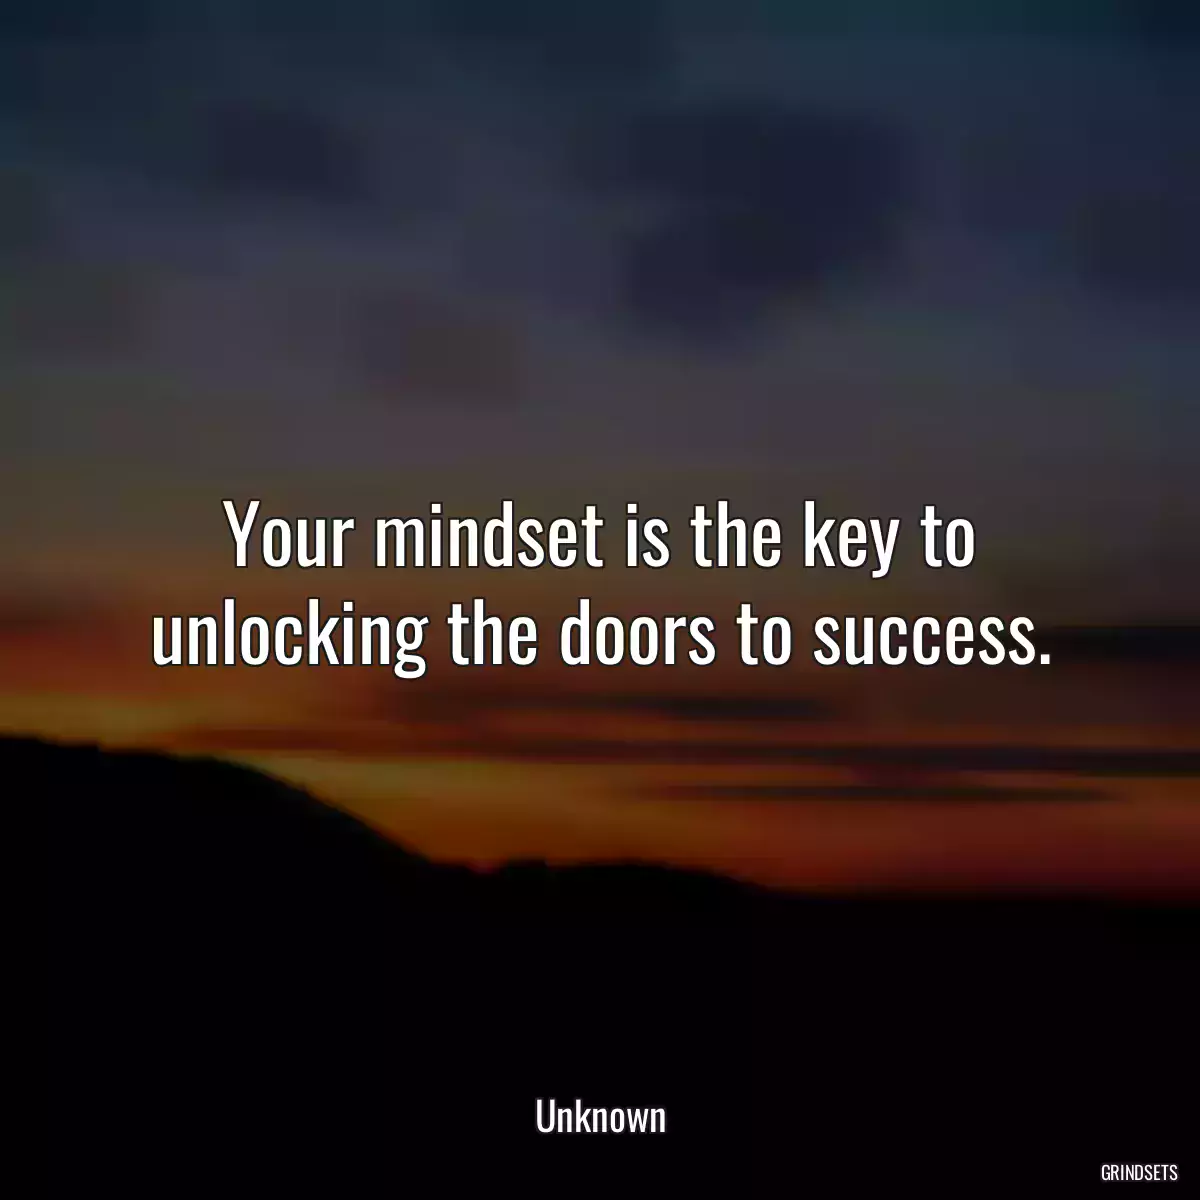 Your mindset is the key to unlocking the doors to success.